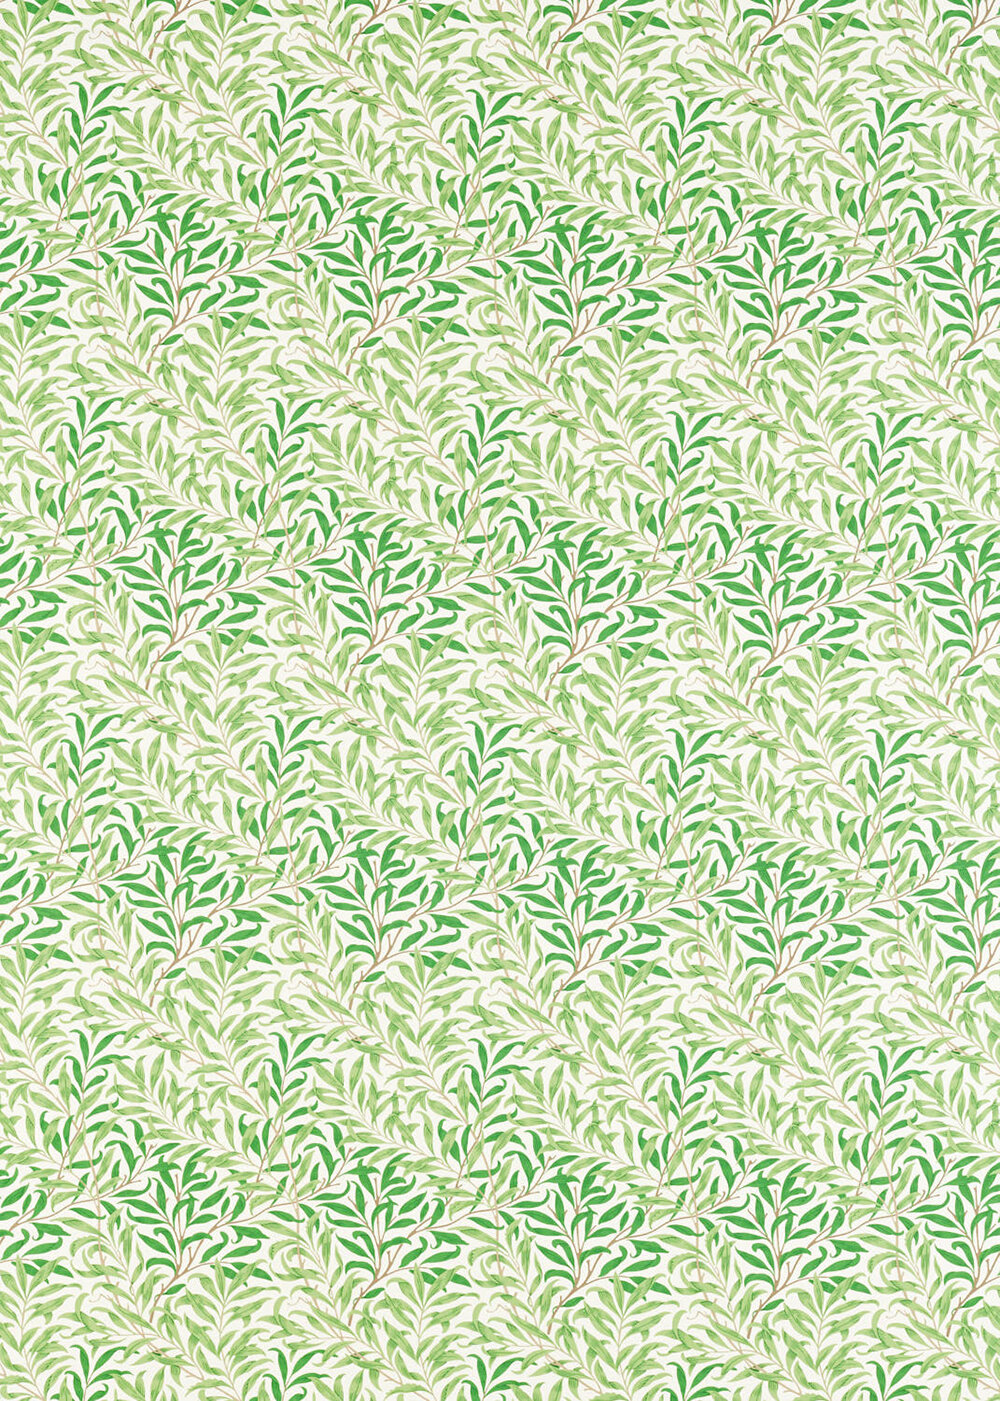 Willow Bough  Fabric - Leaf Green - by Morris